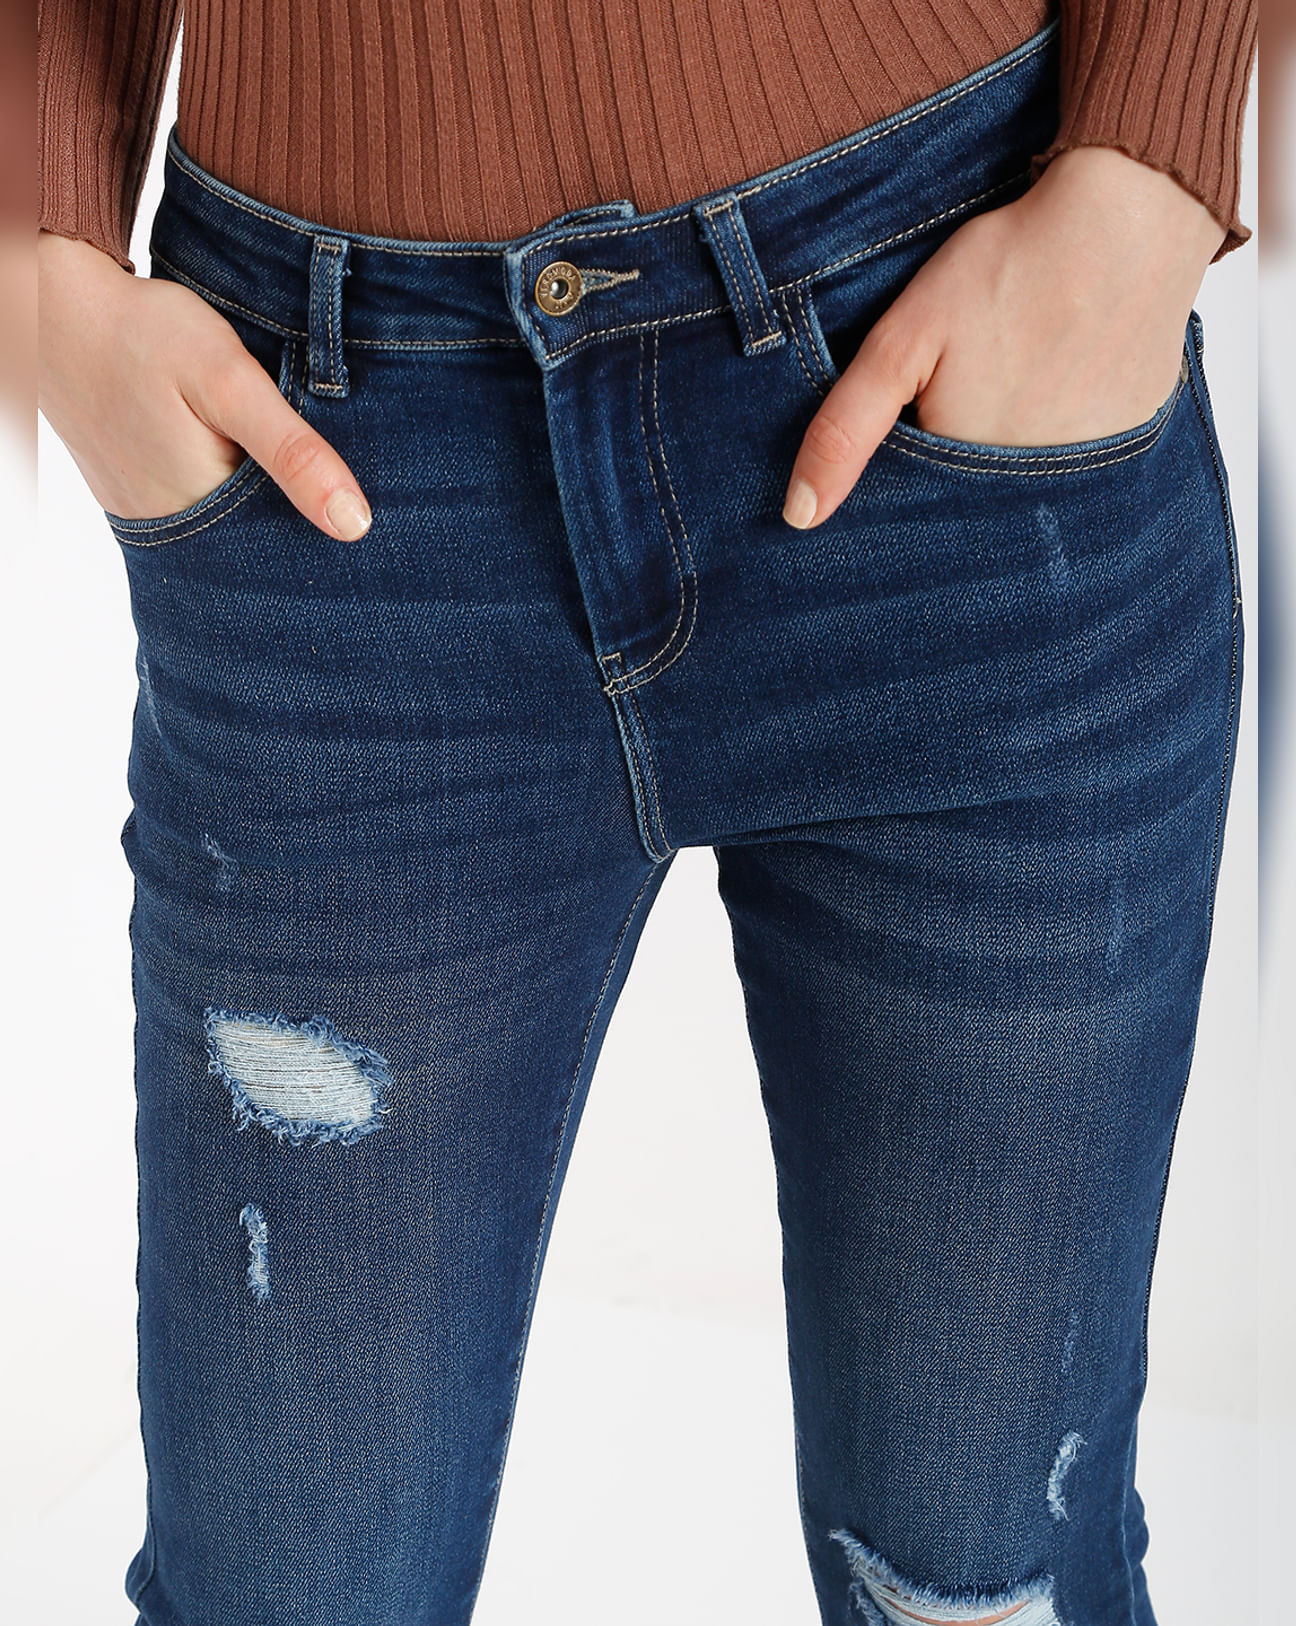 High Rise Distressed Jeans Blue Jeans ripped stretch denim tight fitting  jeans 